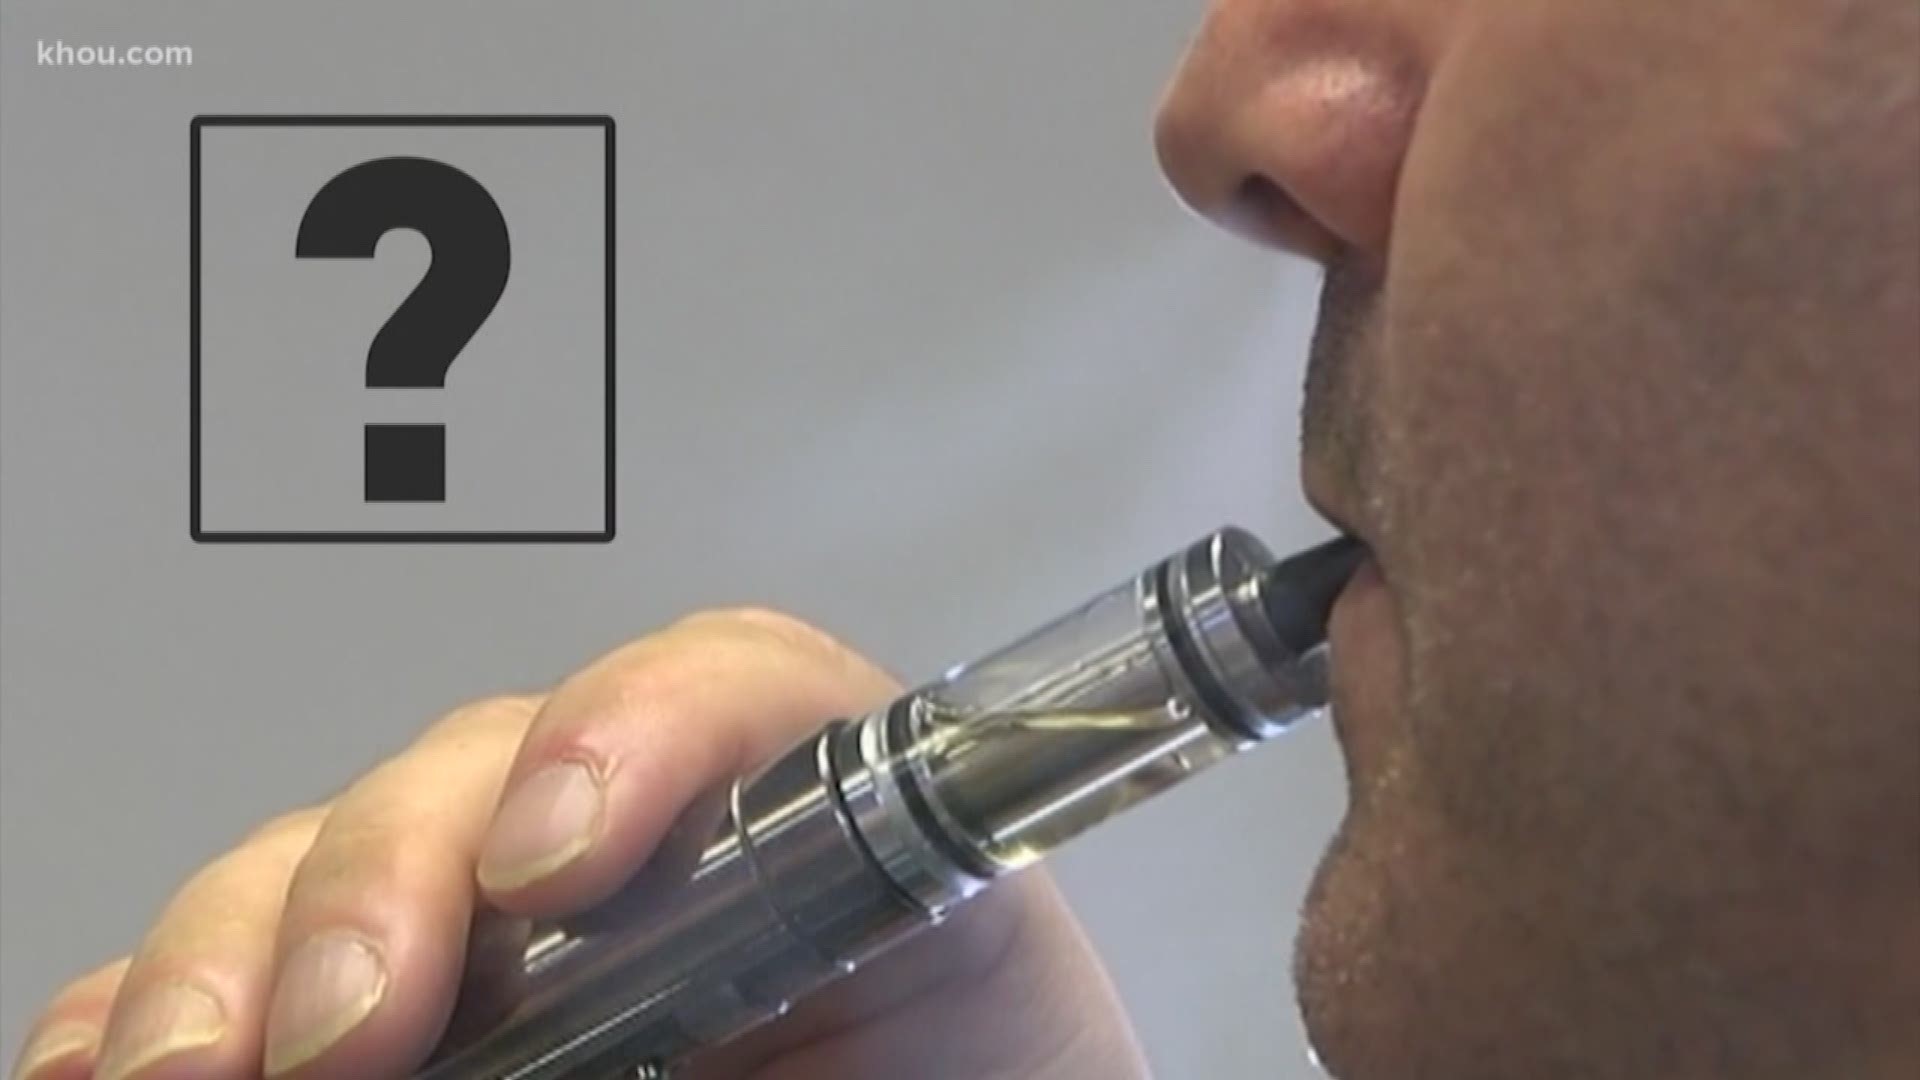 Some people say vaping can be good for you if it helps you to quit smoking, but what's more harmful?